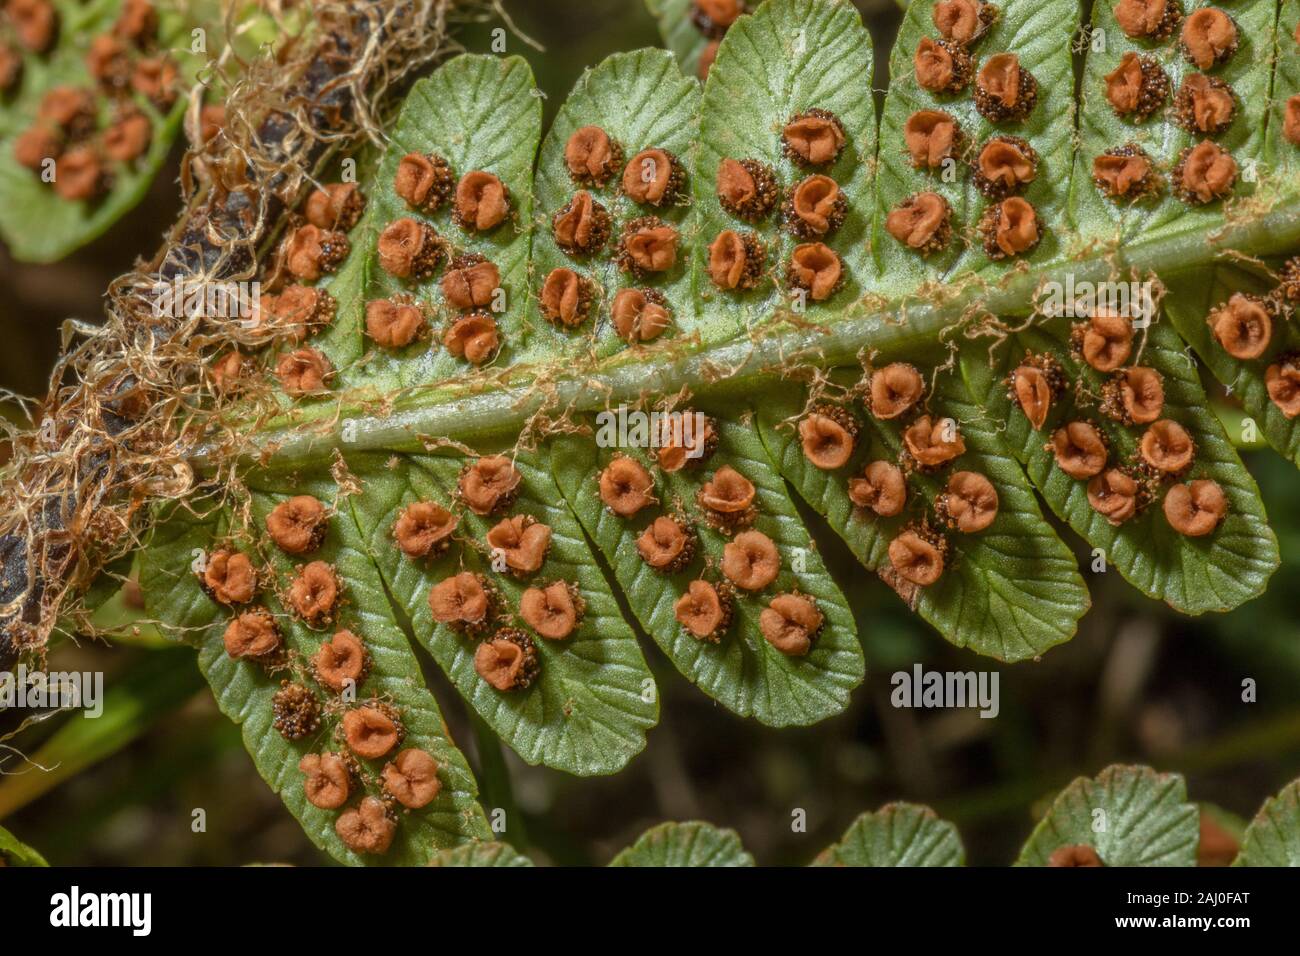 Scaly male fern, Dryopteris affinis, frond with mature sori and scalers. Stock Photo